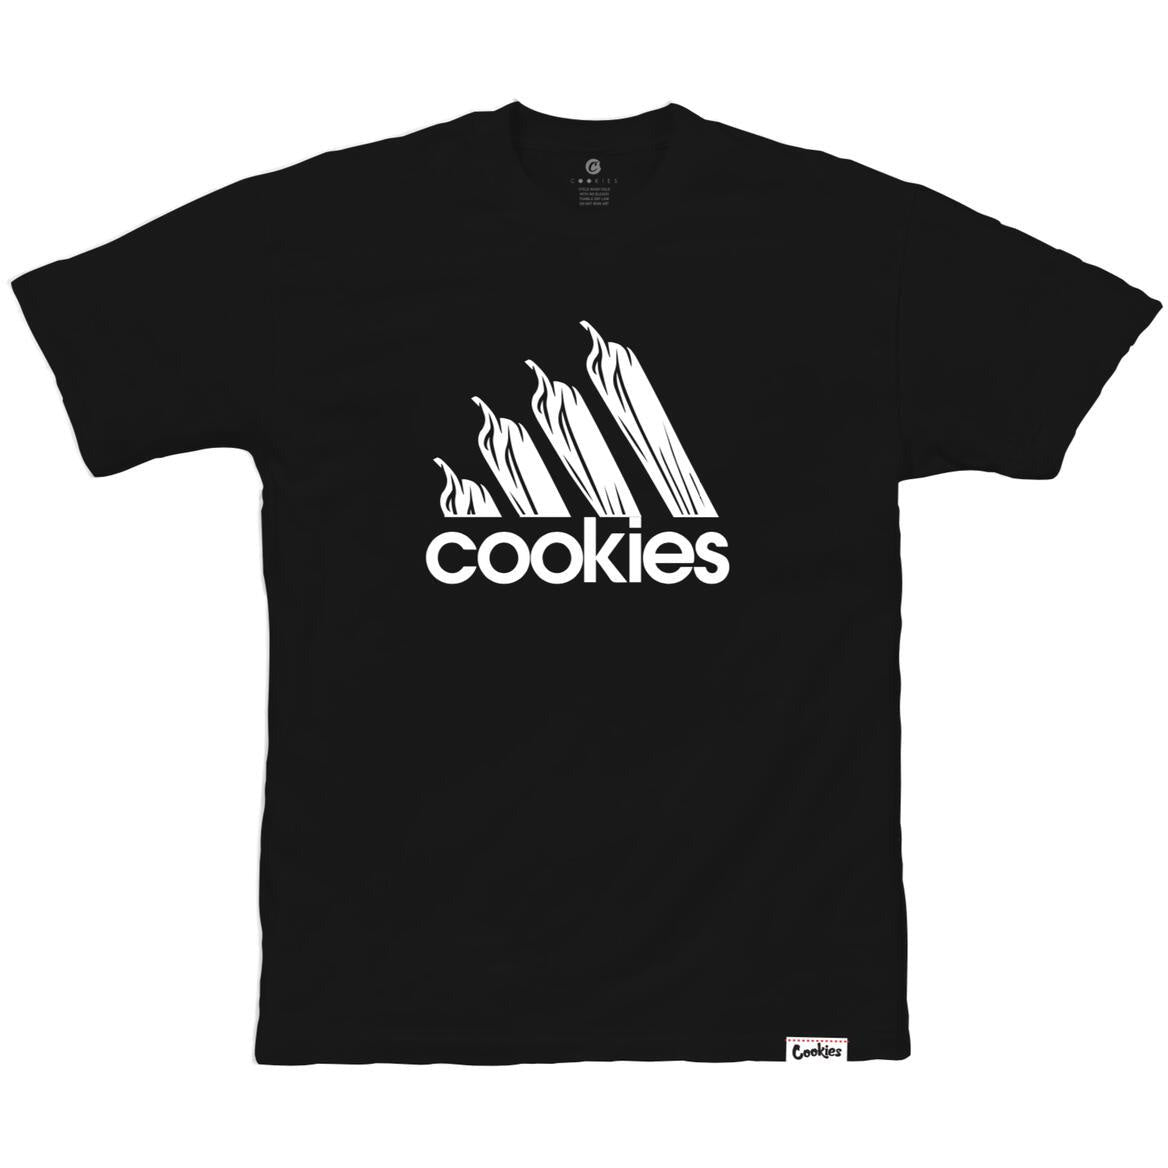 Cookies "There's Levels To This SHHHHH" Black Tee